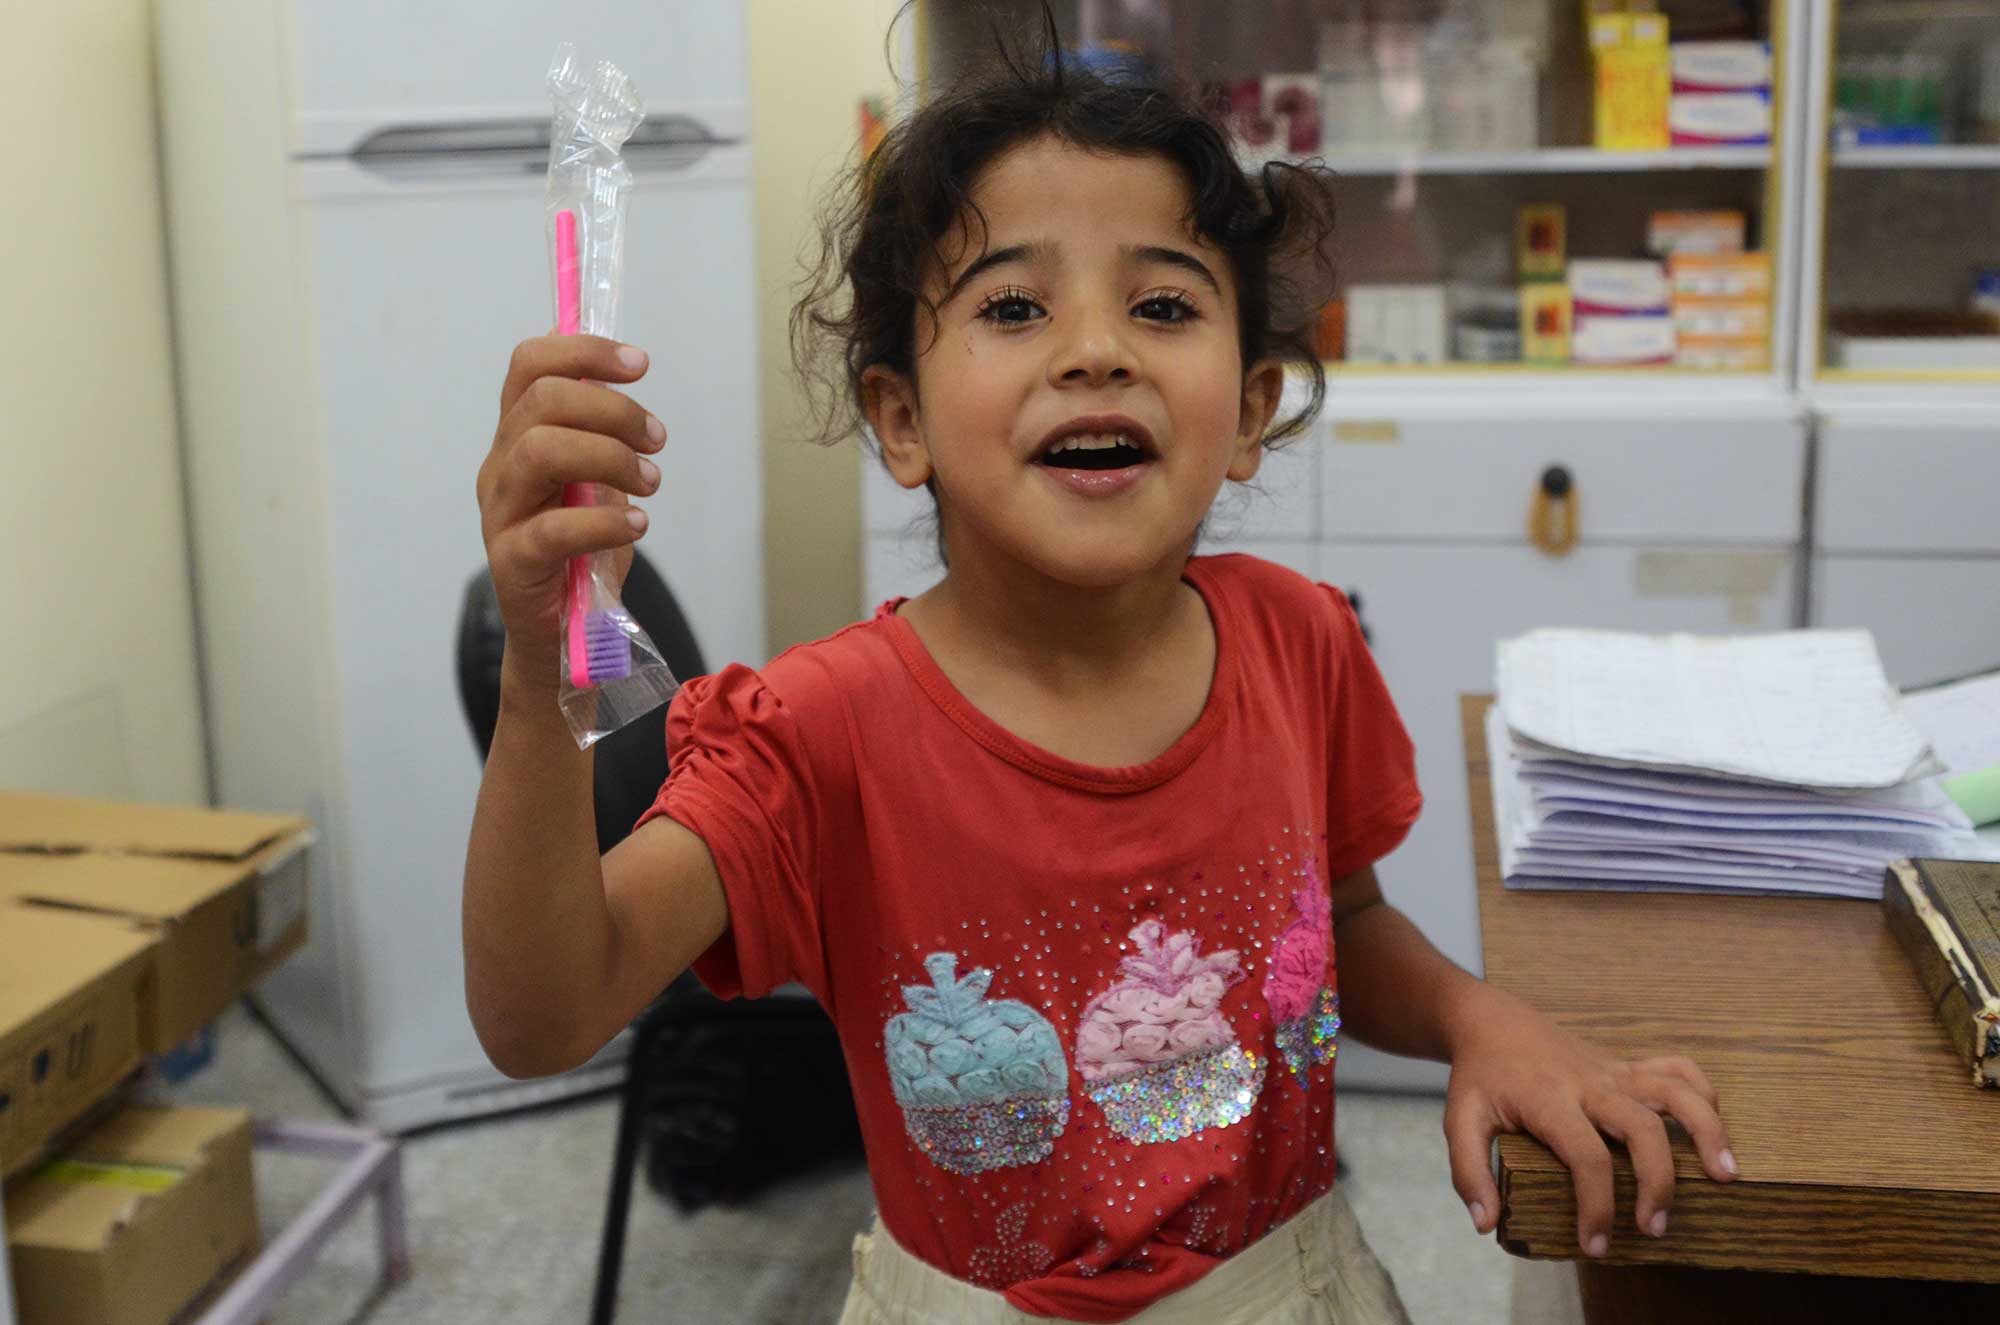 After receiving a new, pink toothbrush, 7-year-old Sundus decides going to the dentist isn't so bad.